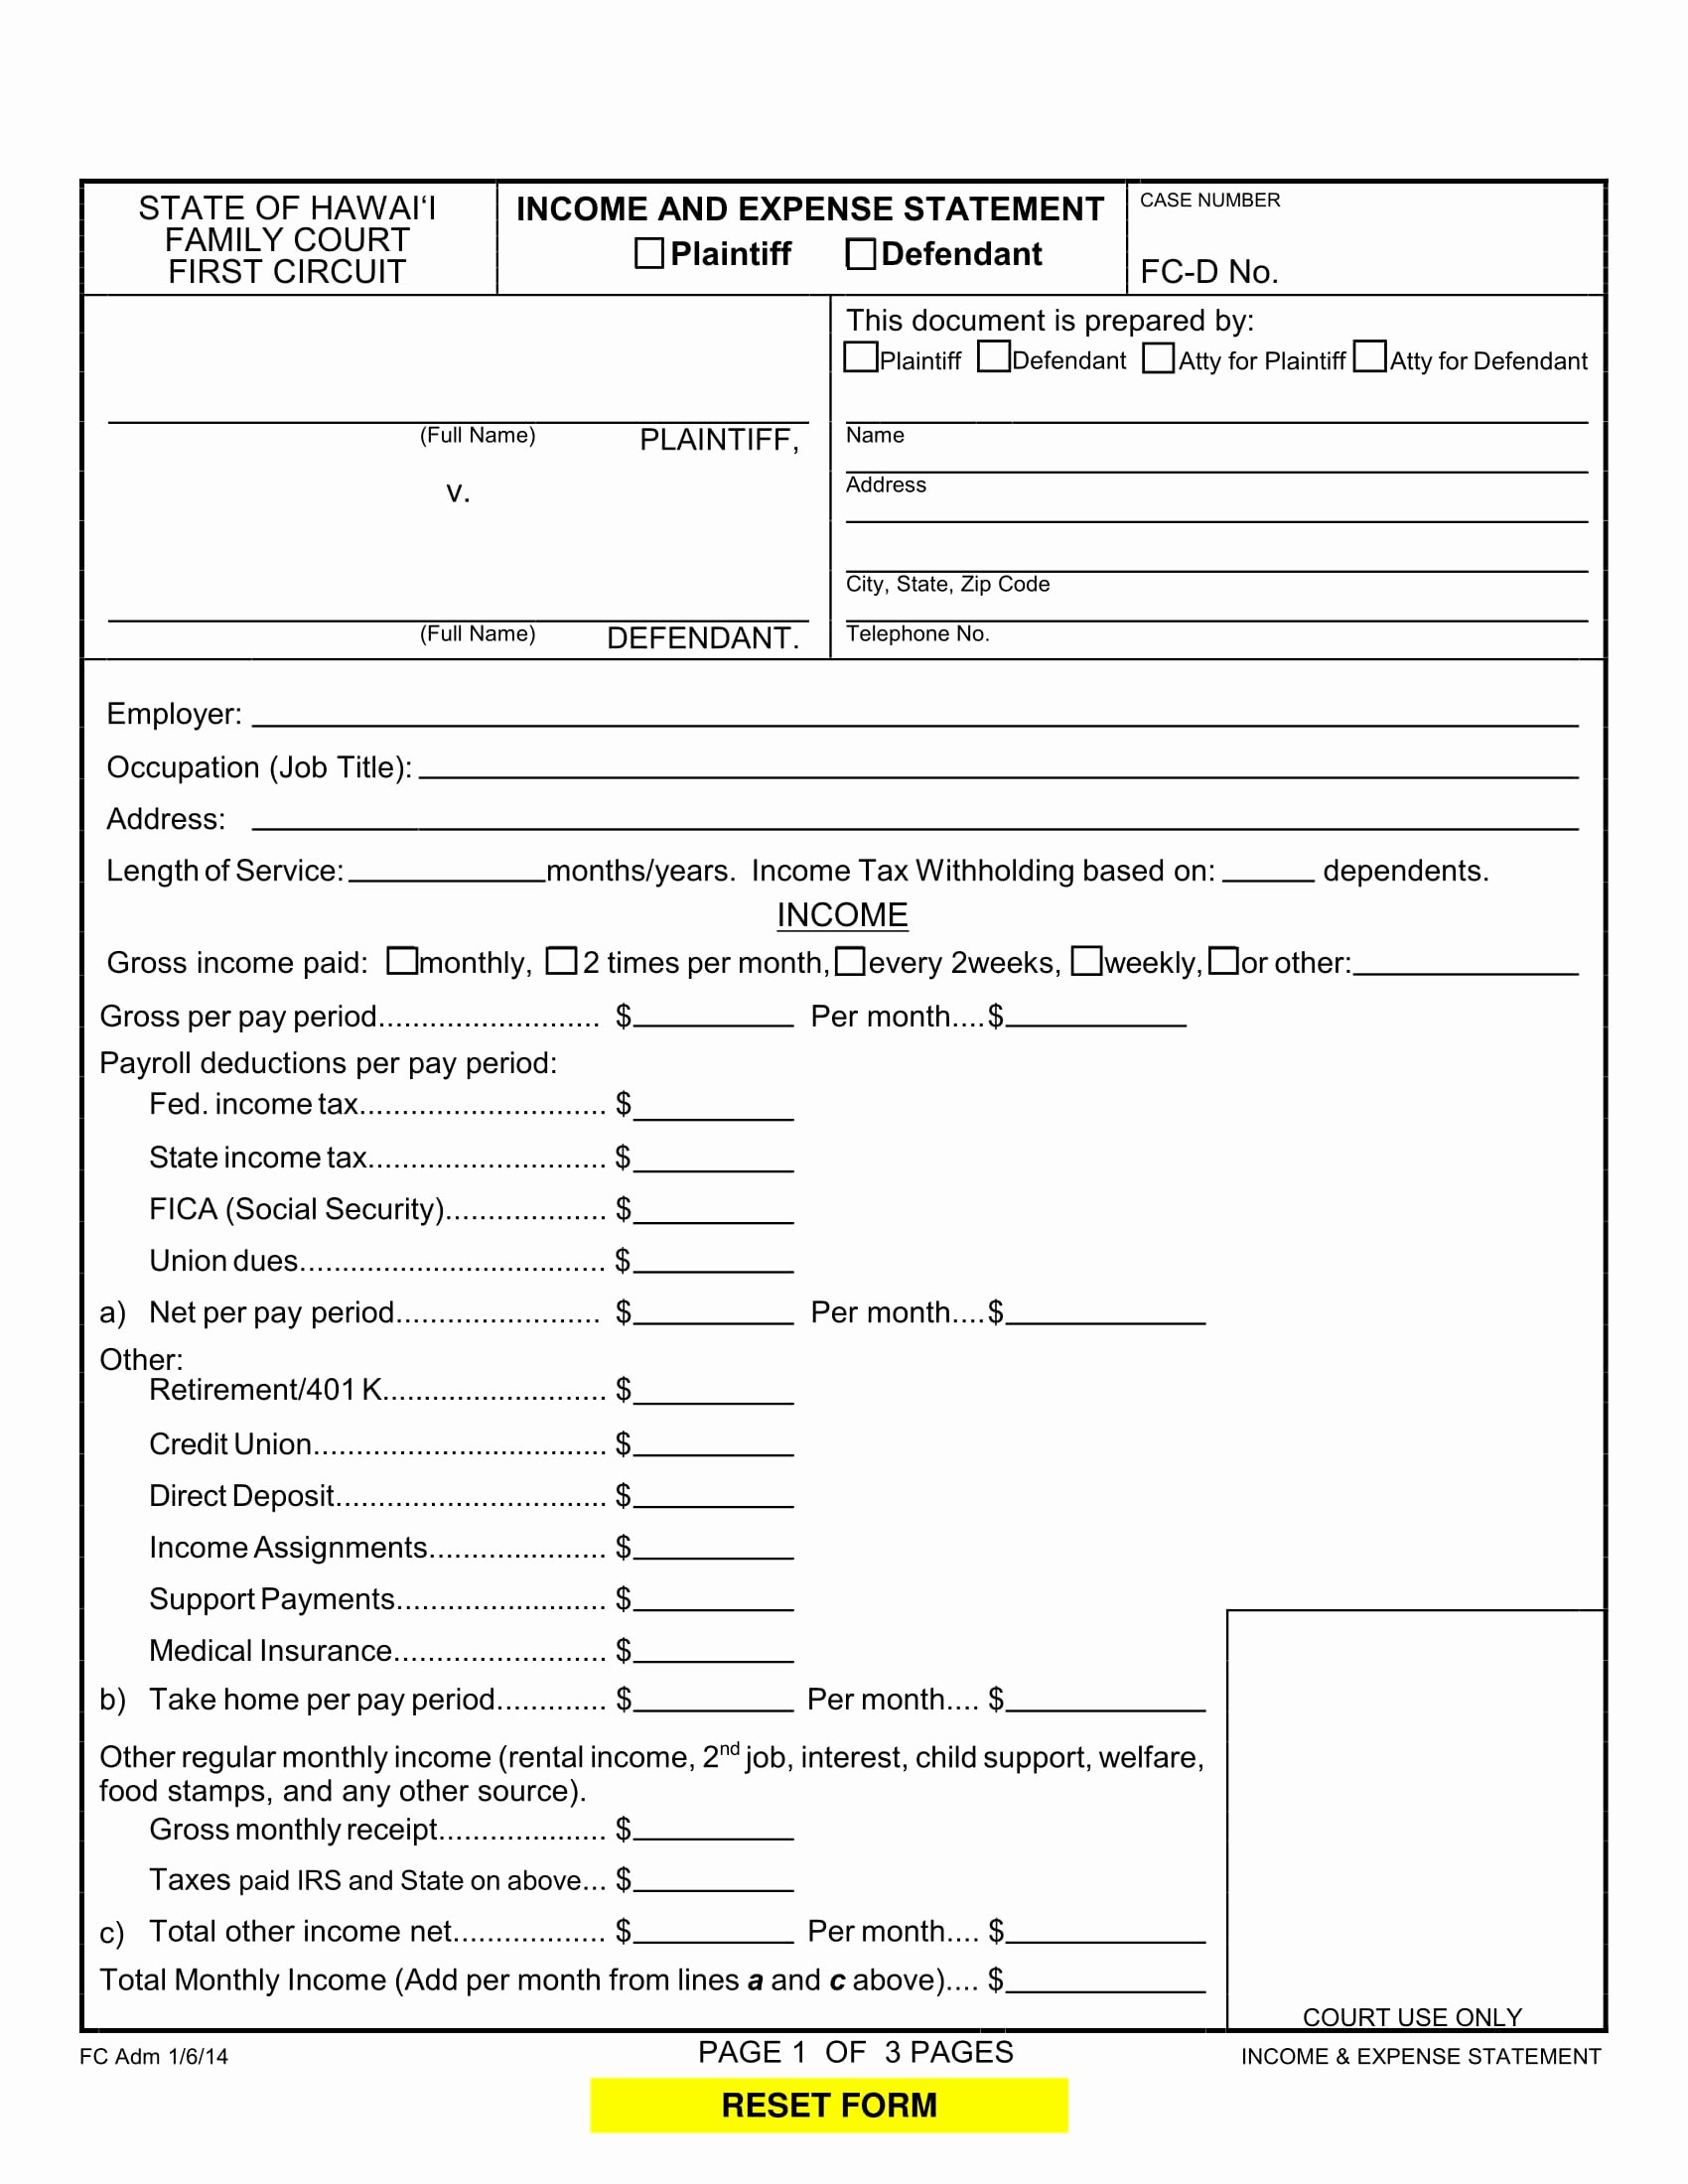 Income and Expense Statement form Fresh Free 29 In E Statement form Samples